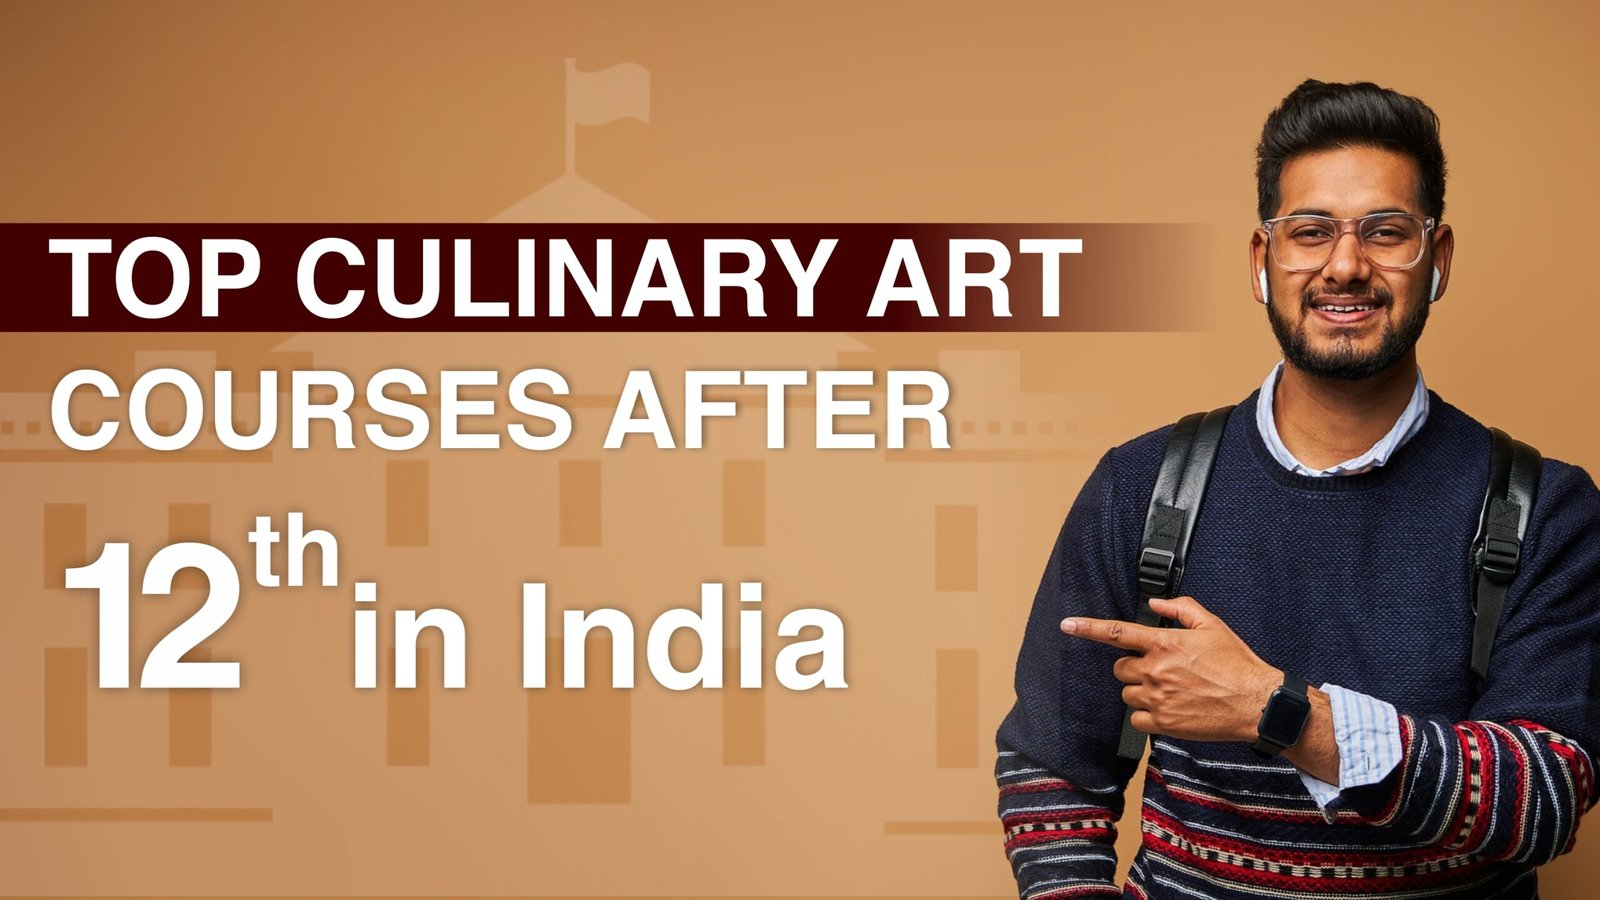 Culinary Courses after 12th in India